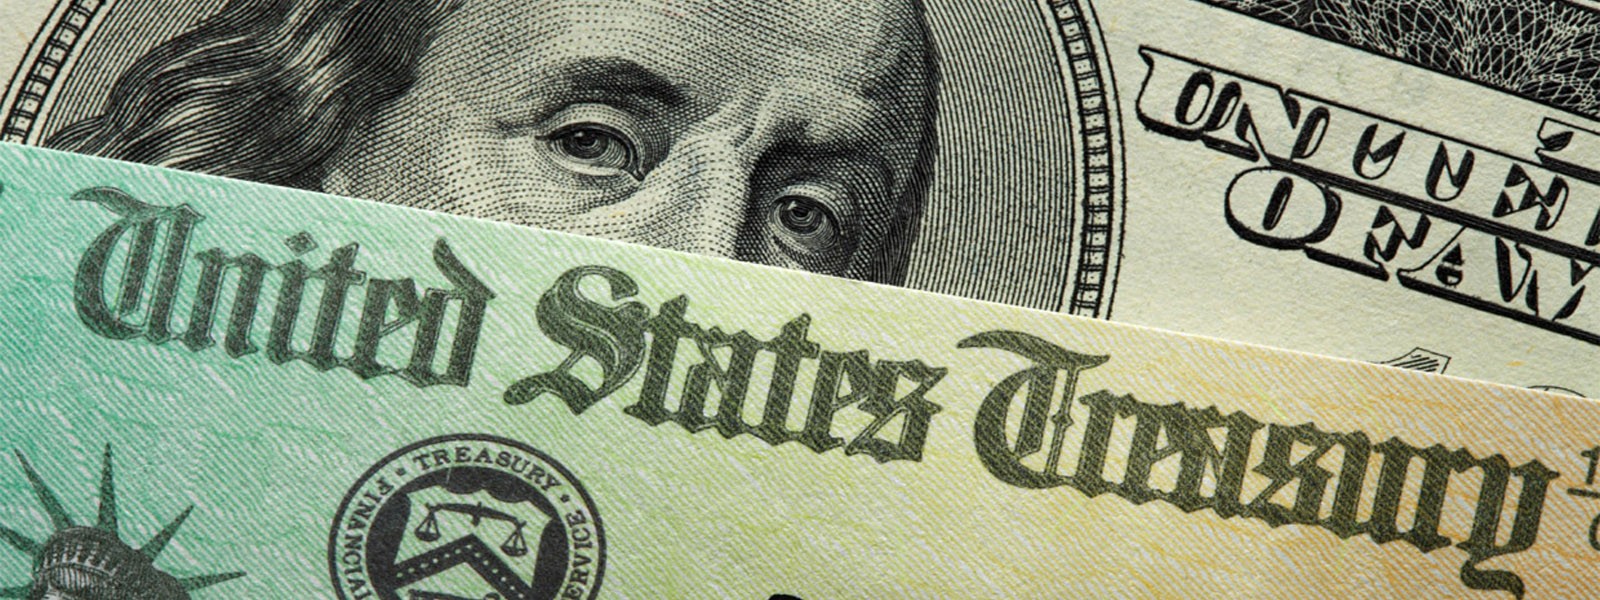 Citizen Tax Service will work hard to make sure you get the most out of your tax refund.